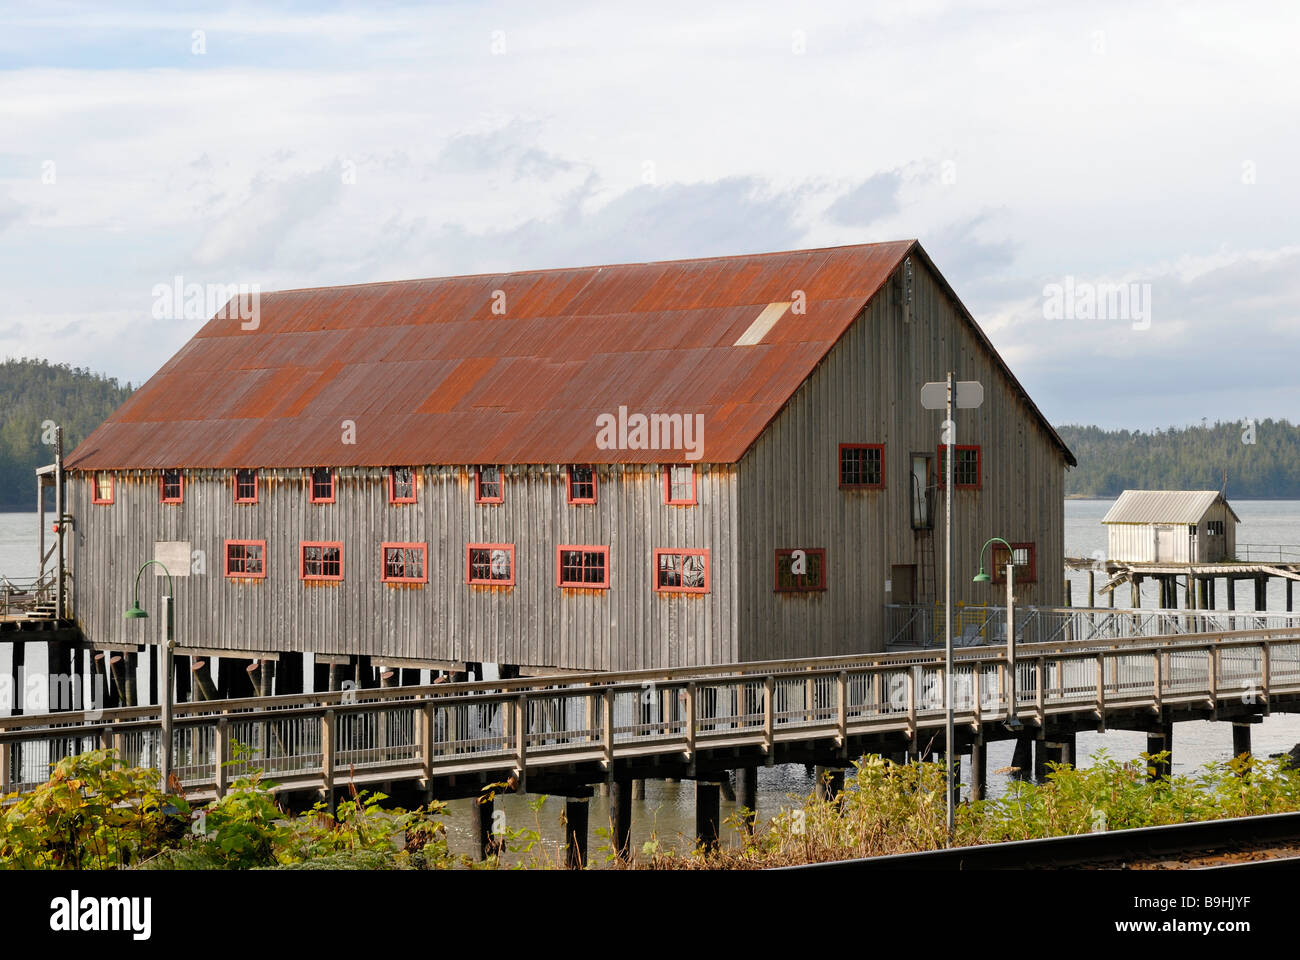 Abandoned fish cannery, Historic Northern Pacific Cannery, Prince Rupert, British Columbia, Canada, North America Stock Photo